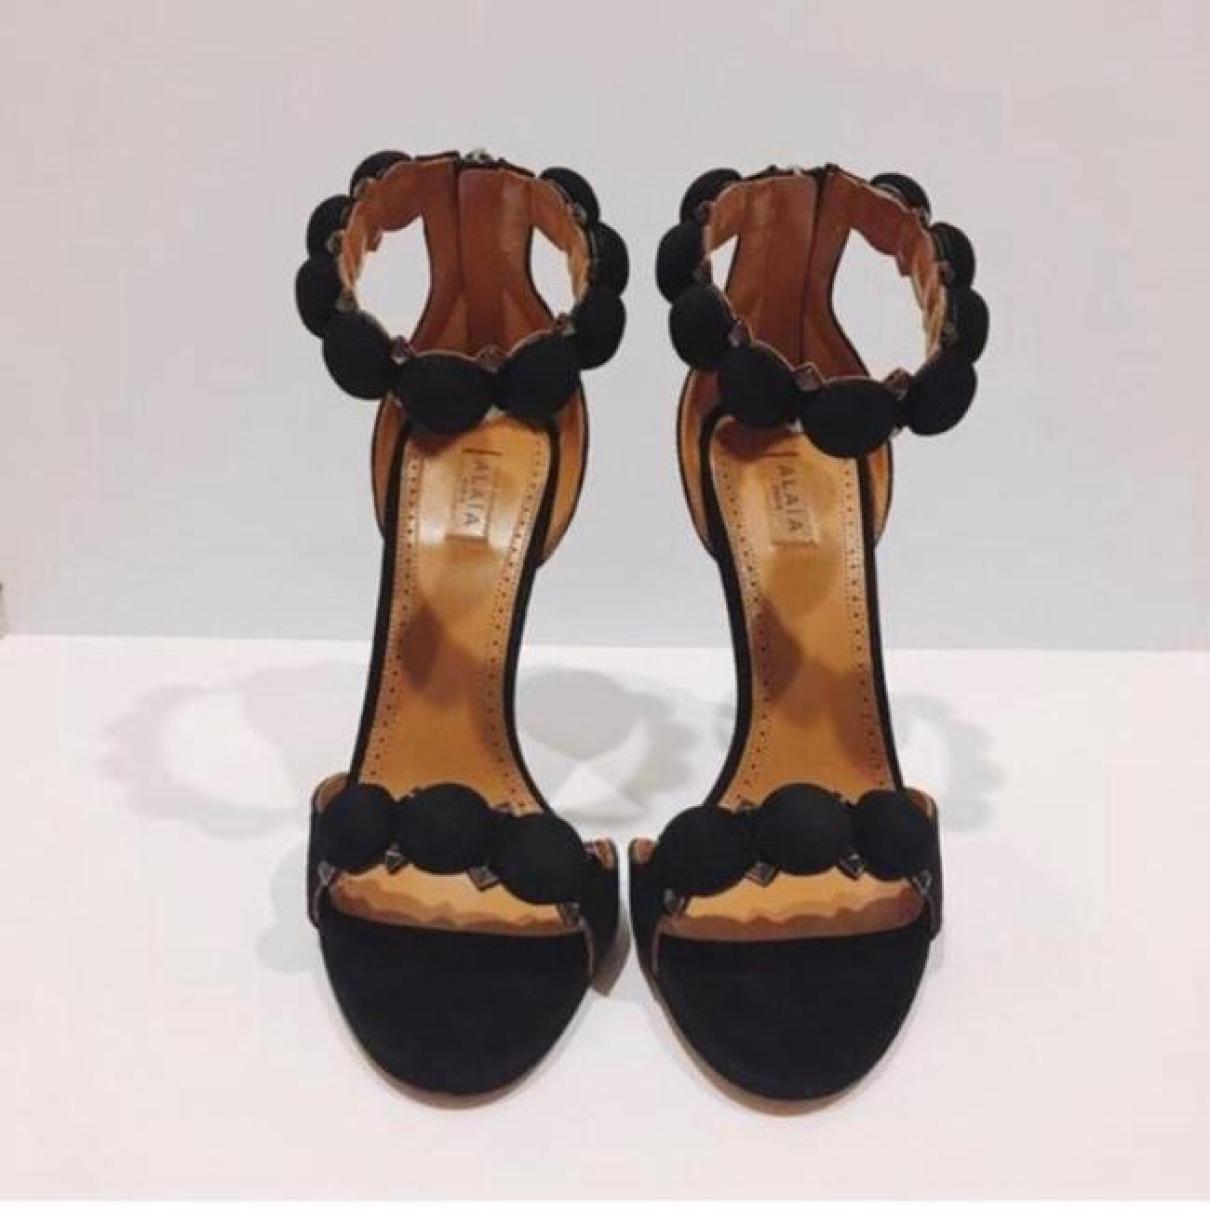 Leather sandals - 9